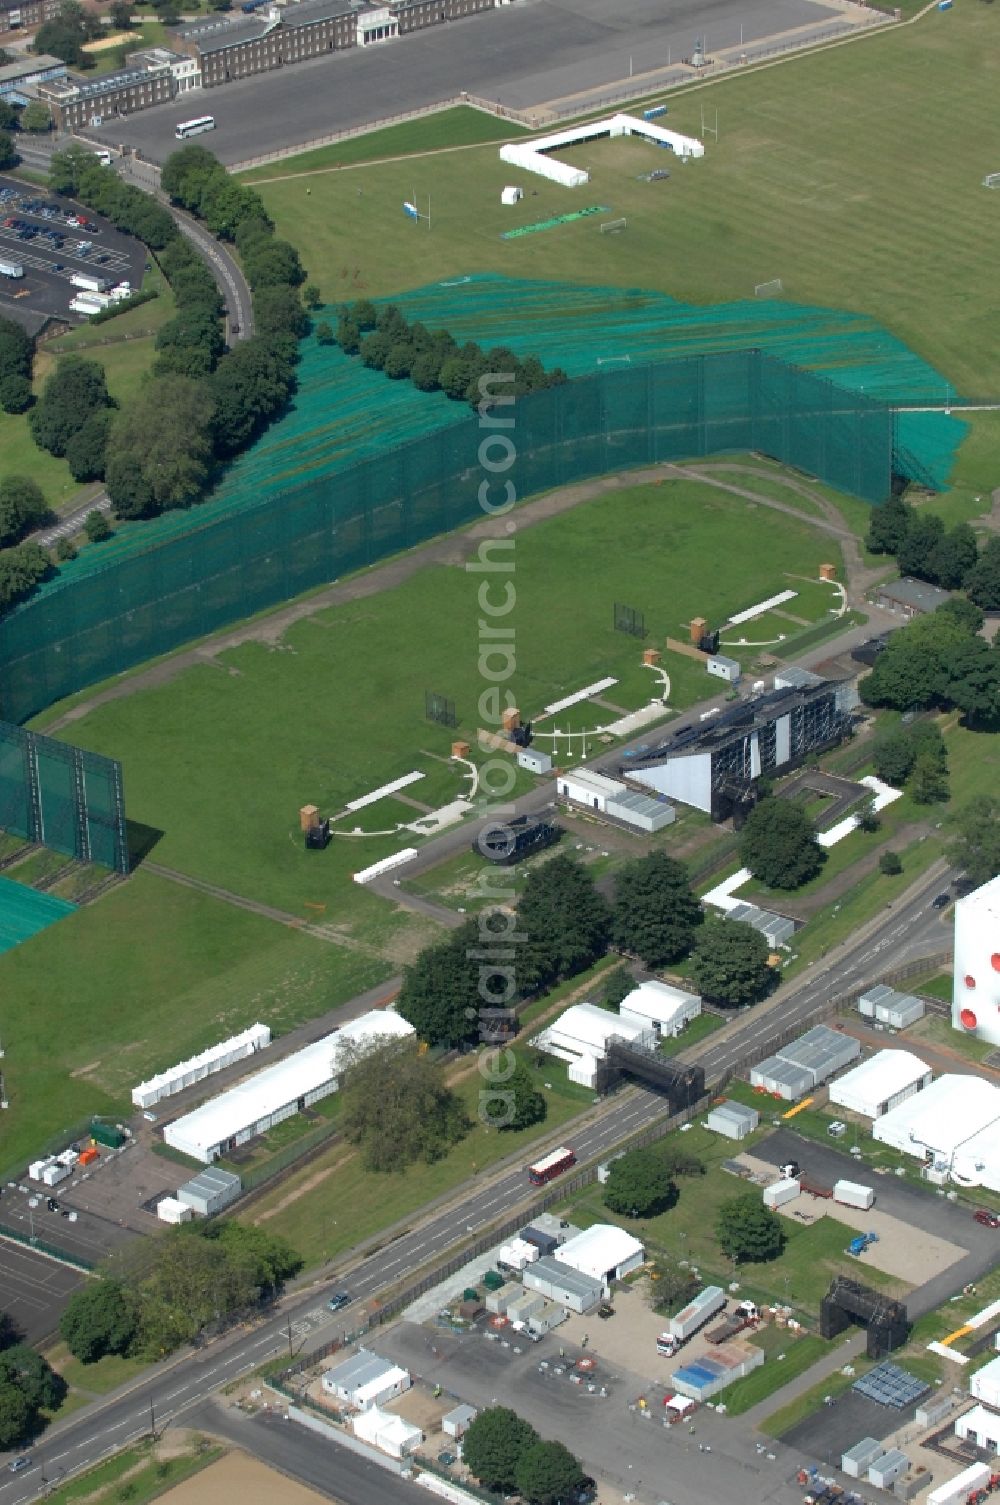 London from above - On the grounds of the historic Royal Artillery Barracks in London, will take place amongst others in the futuristic indoor competitions in shooting, one of the Olympic and Paralympic venues for the 2012 Games in Great Britain